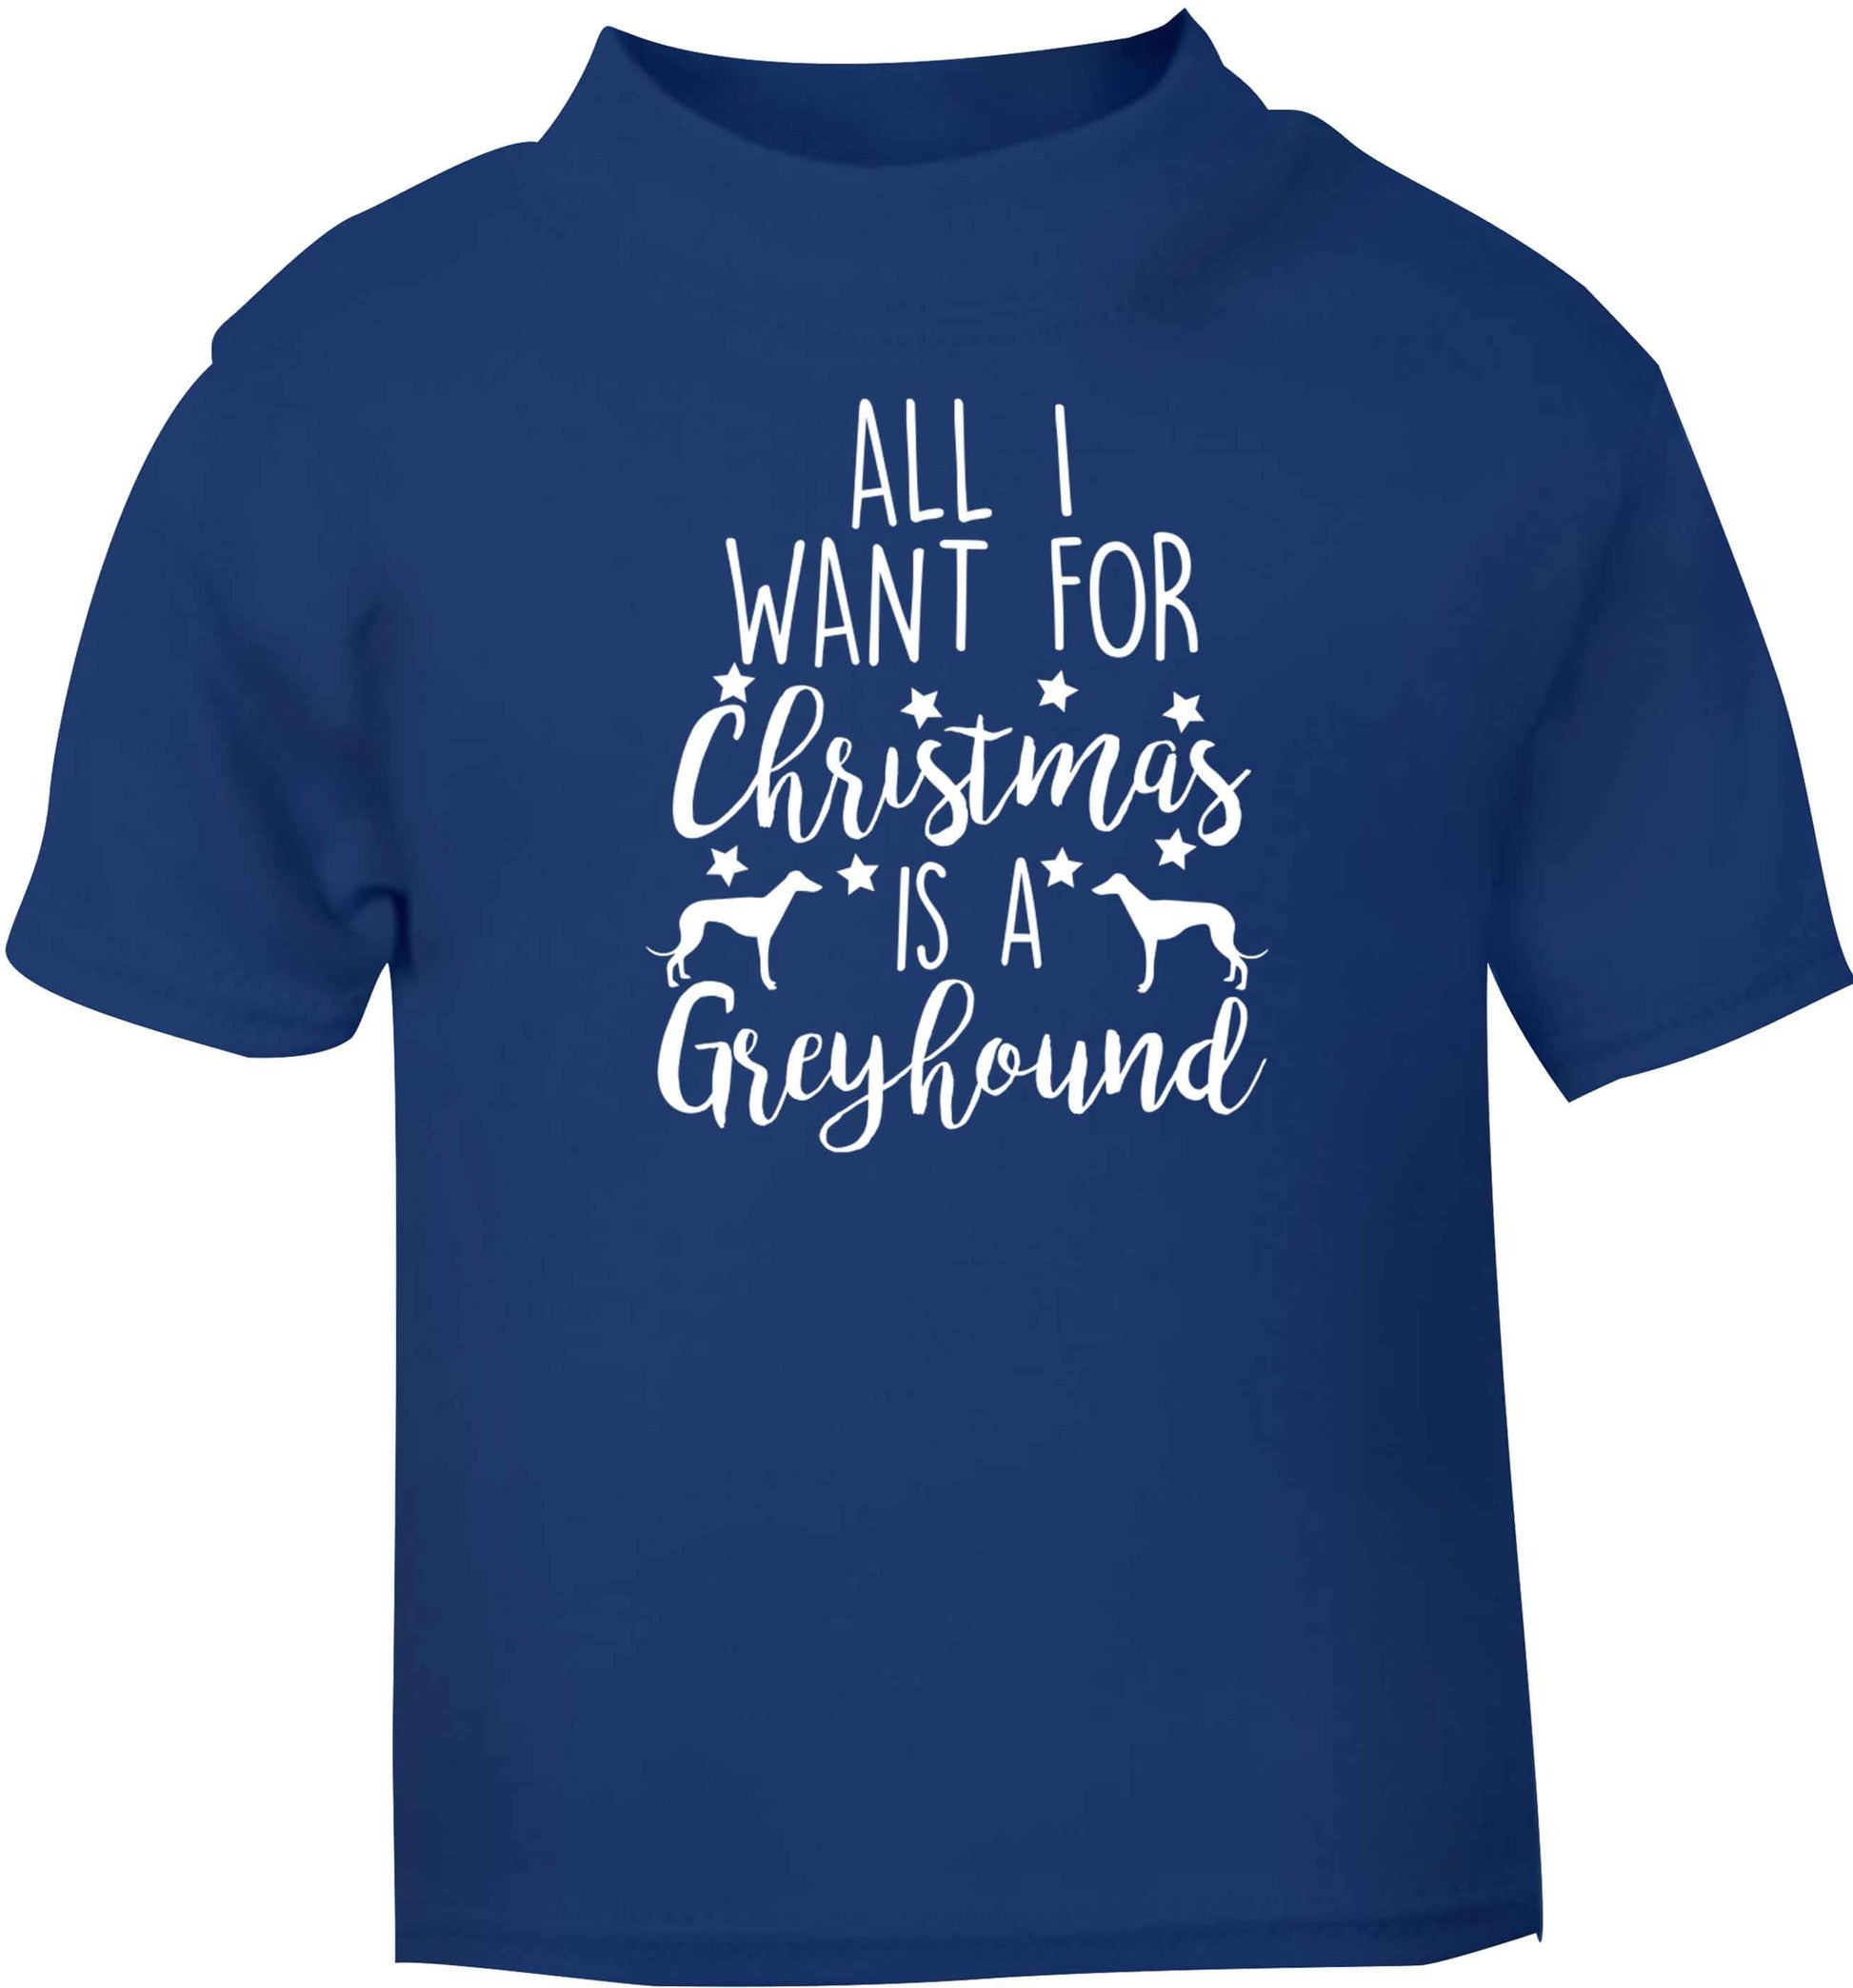 All I want for Christmas is a greyhound blue baby toddler Tshirt 2 Years